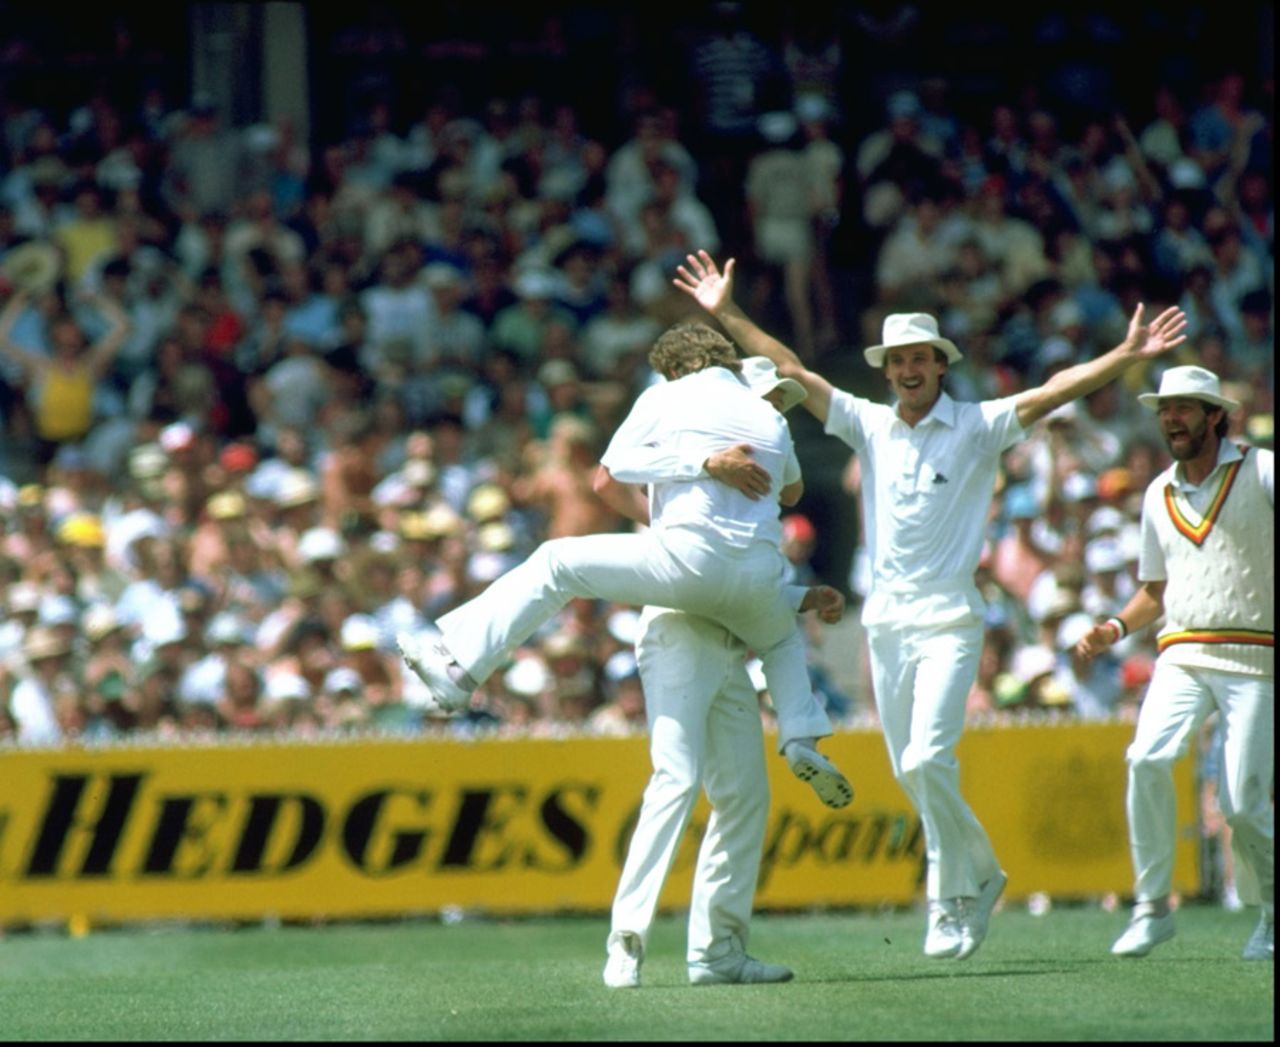 Ian Gould catches Greg Chappell off Norman Cowans, Australia v England, 4th Test, Melbourne, 29 December, 1982